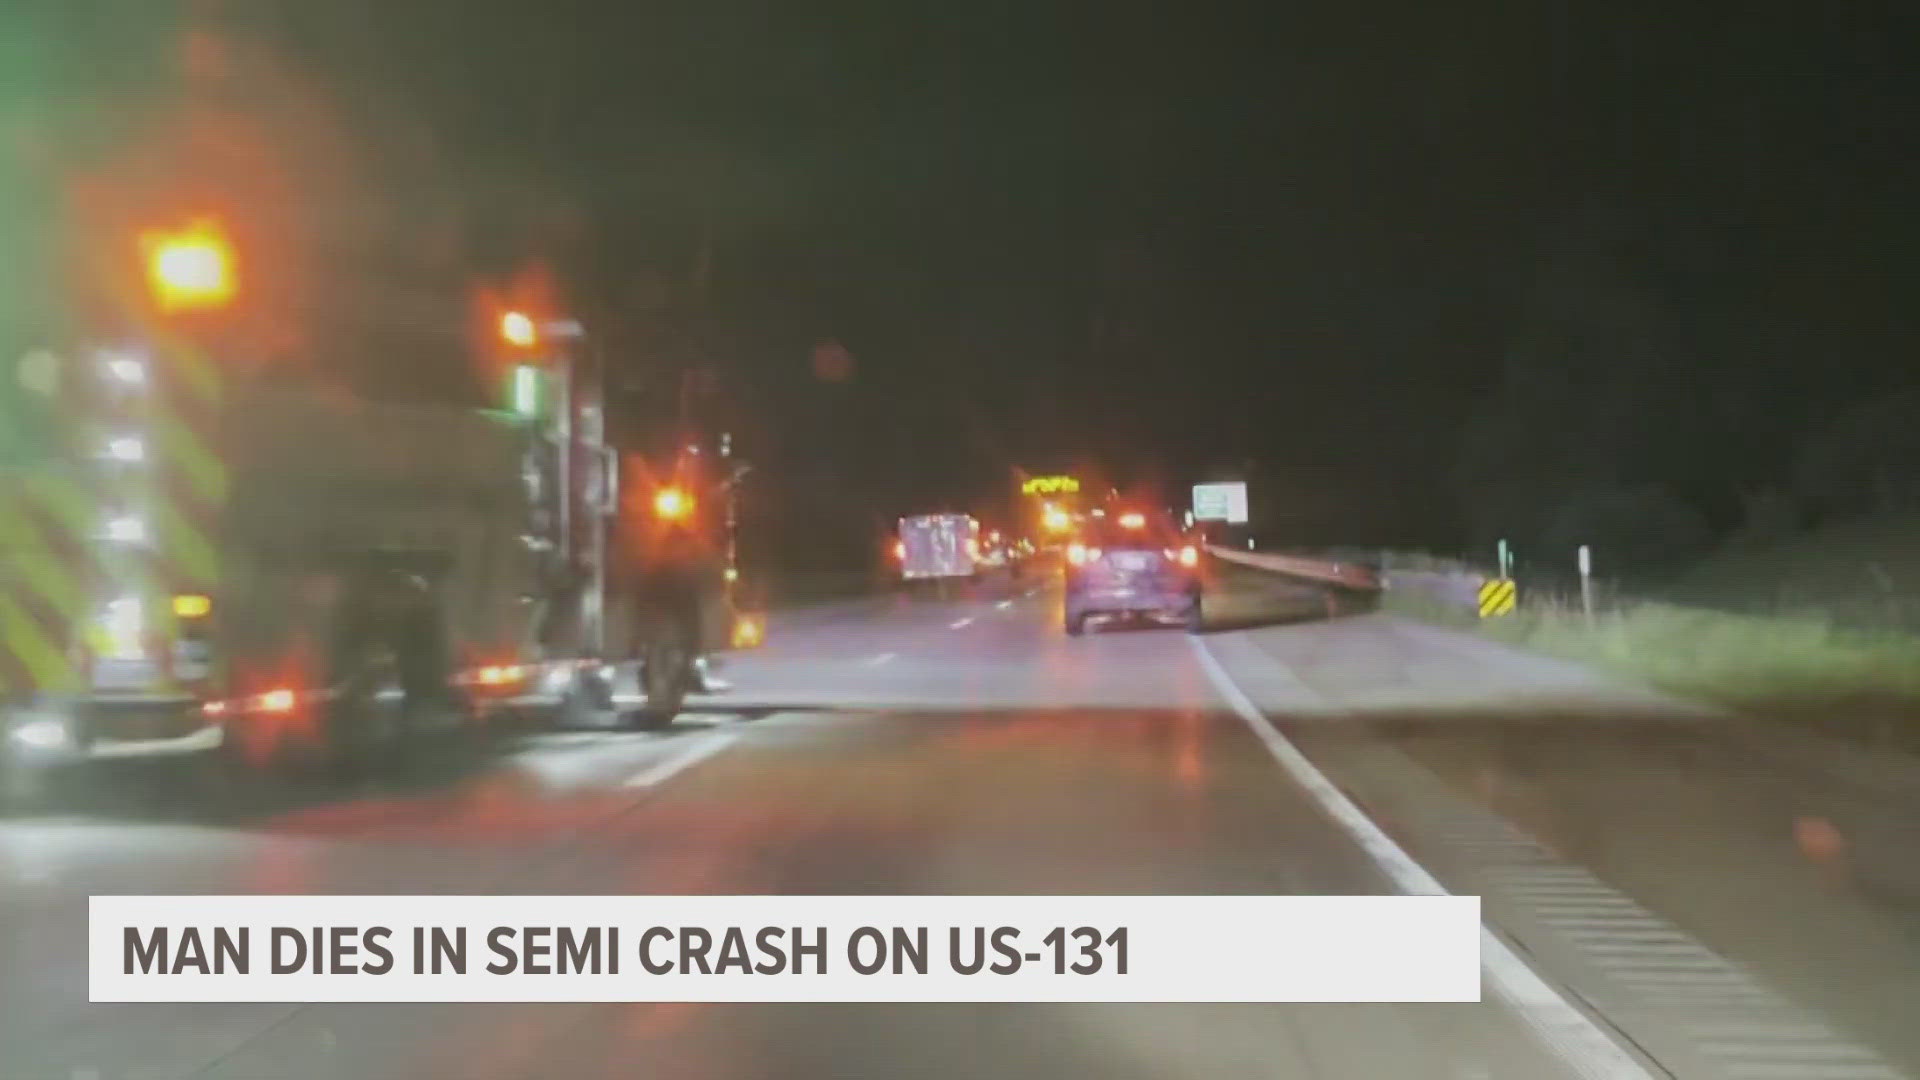 MSP said the semi drove off southbound US-131 to the left and entered the median into a heavily wooded area.